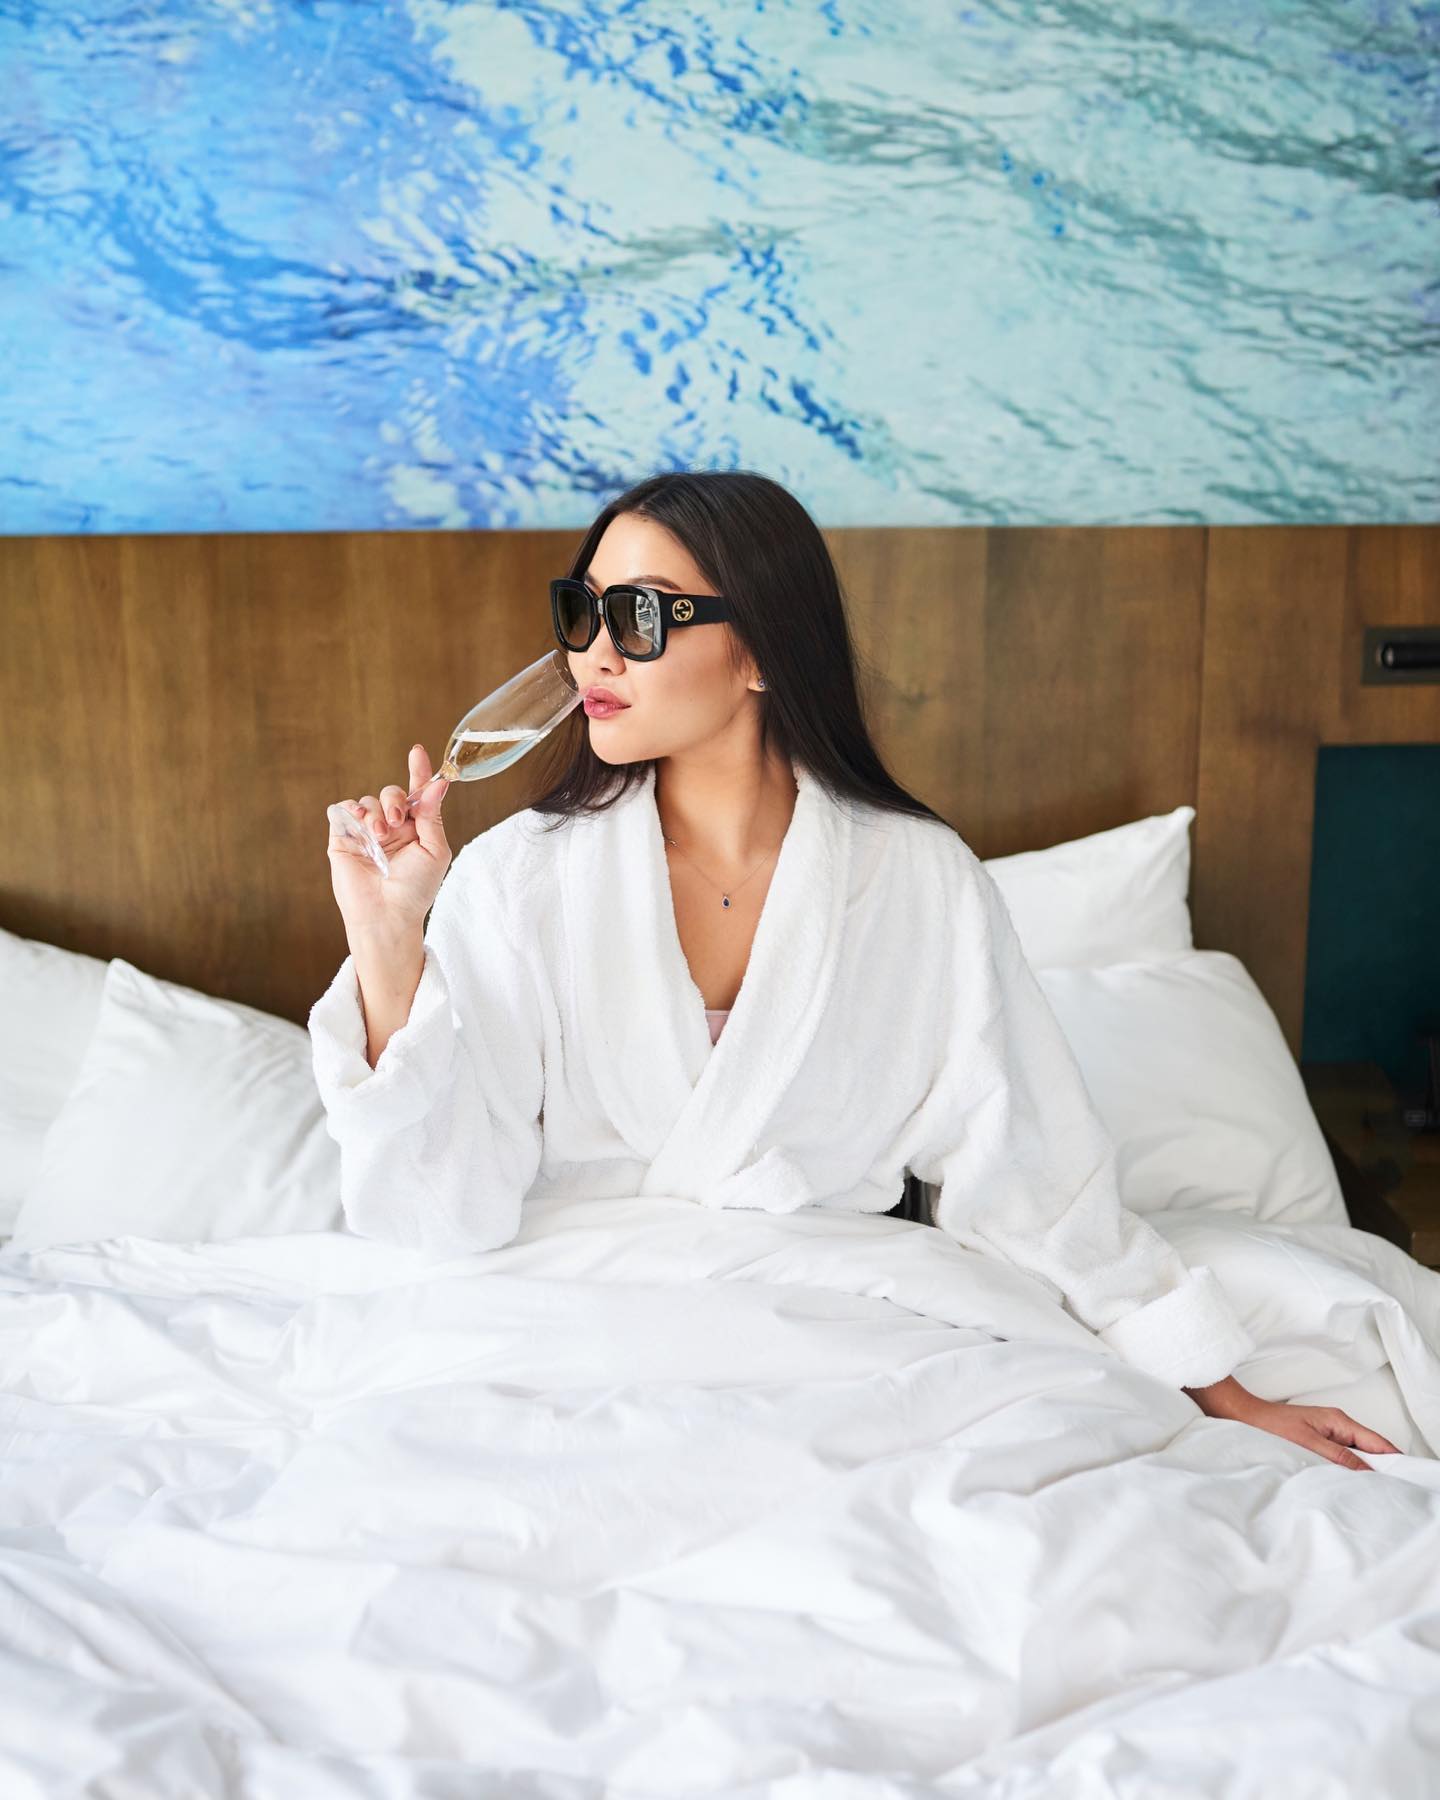 Champagne in bed? It’s almost the weekend after all #atEAST